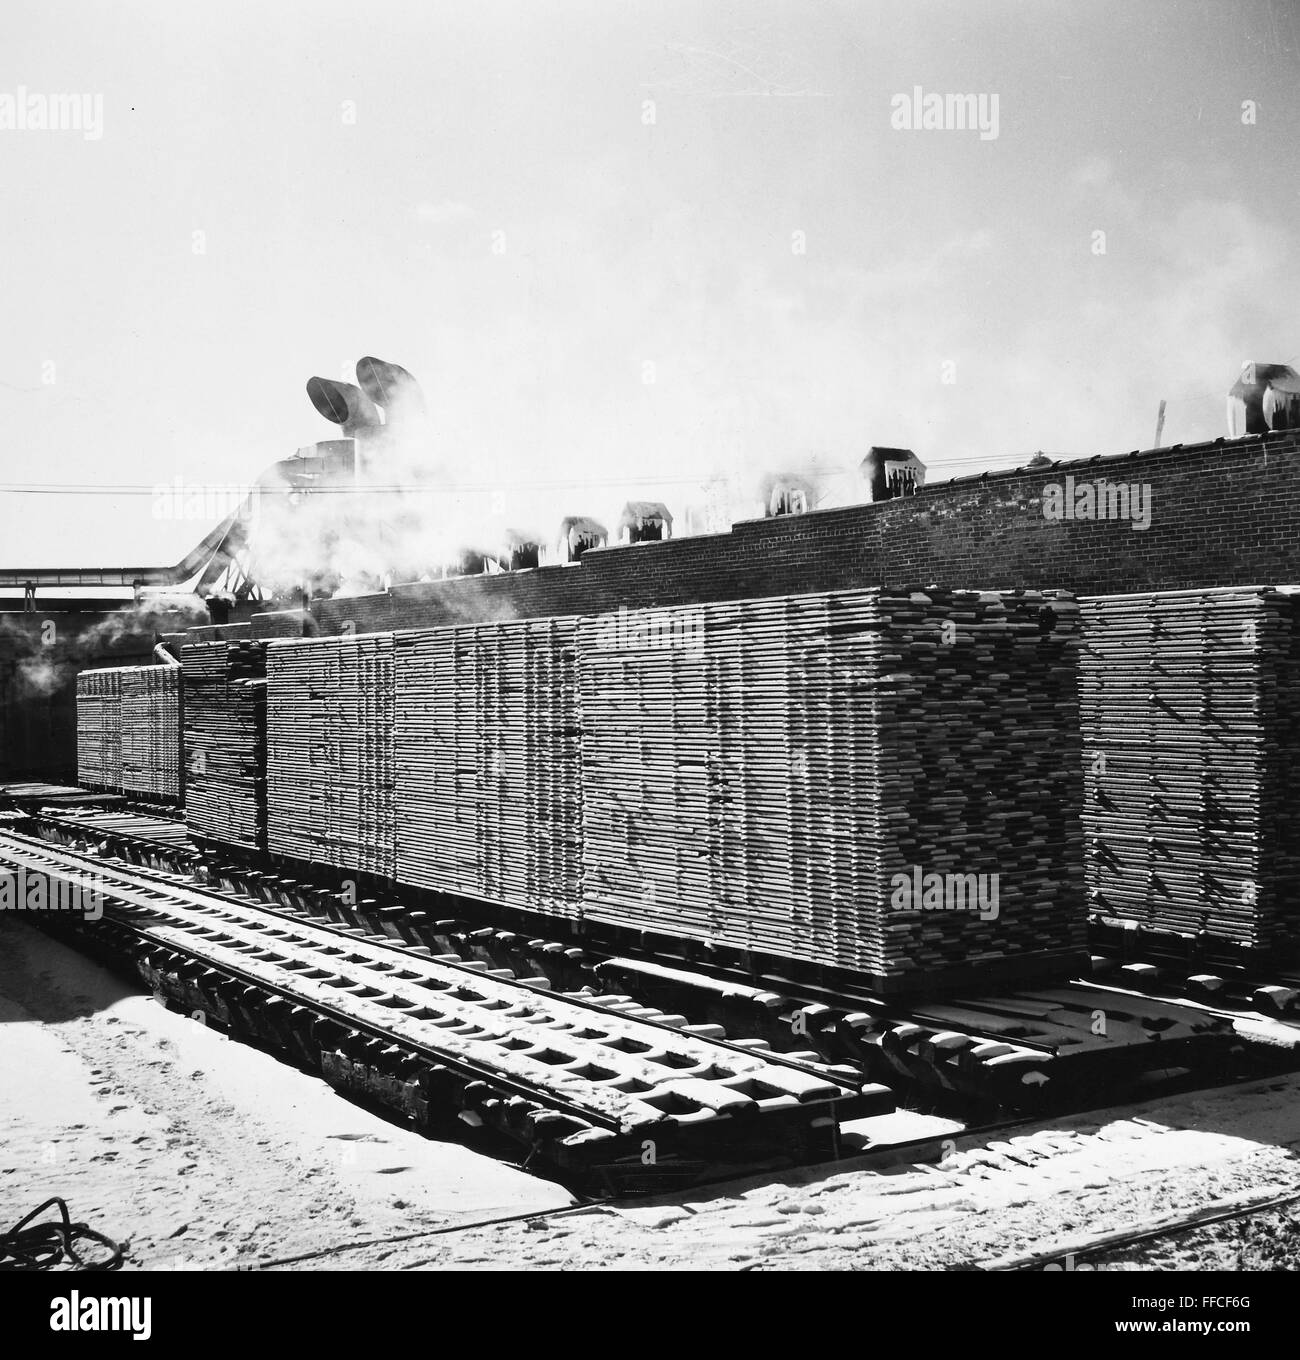 LUMBER MILL, c1955. /nStacks of lumber ready for the dry kilns at Conner Lumber & Lard Company's mill at Laona, Wisconsin. Photograph, mid-20th century. Stock Photo